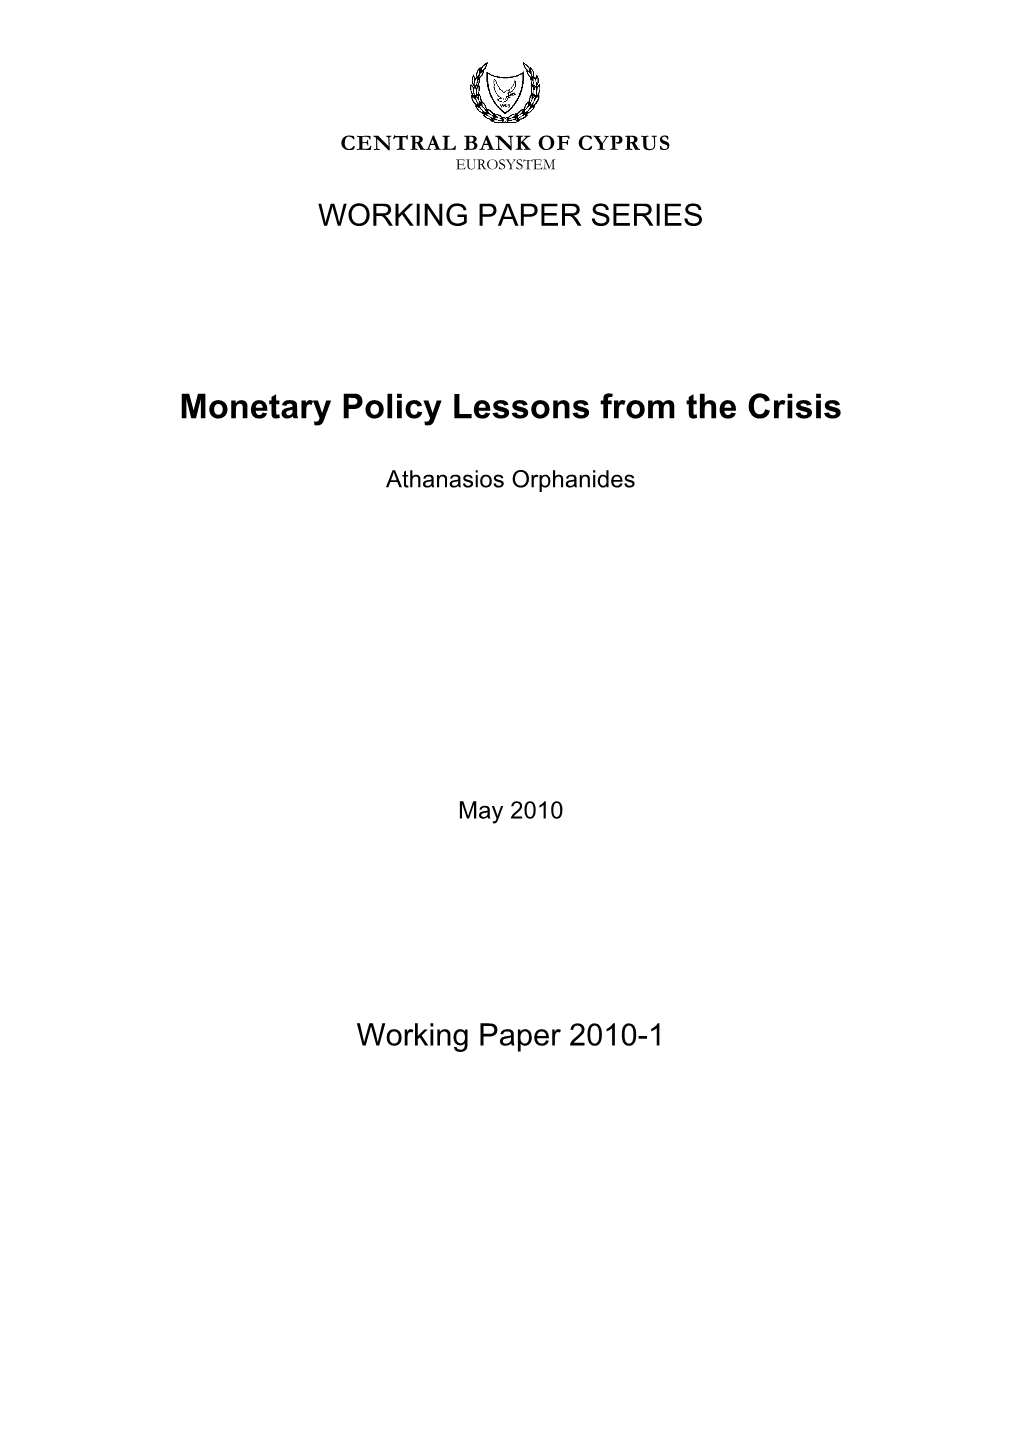 Monetary Policy Lessons from the Crisis